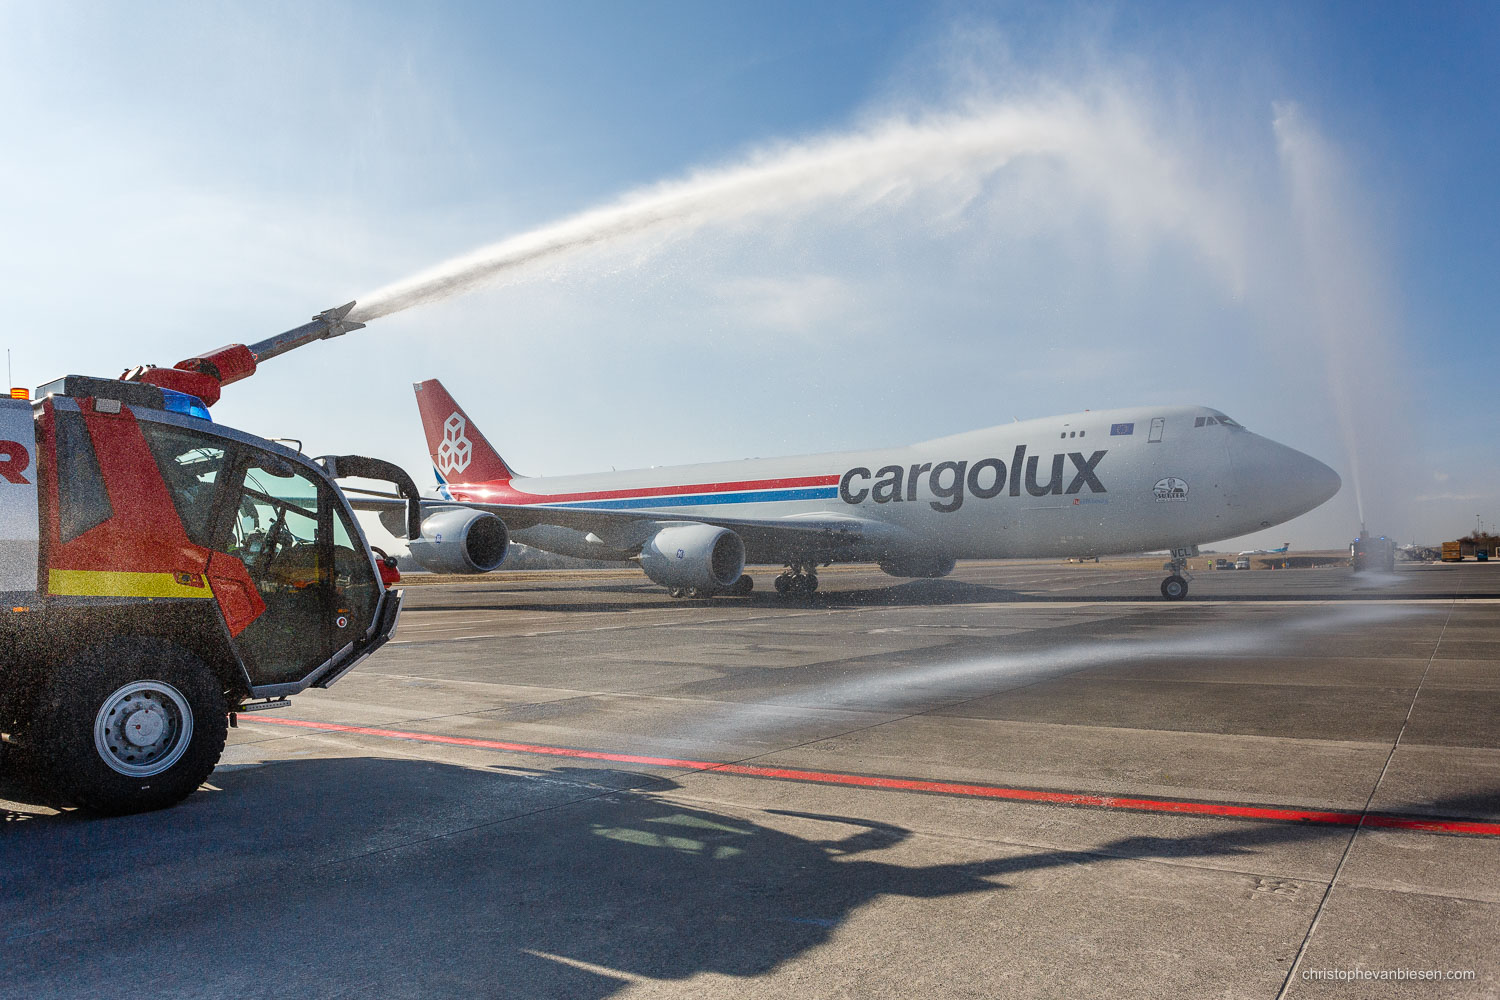 Work with me - Commission Work - Boeing 747 of Luxembourg's Cargolux fleet - Inauguration - Photography by Christophe Van Biesen - Luxembourg Landscape and Travel Photographer